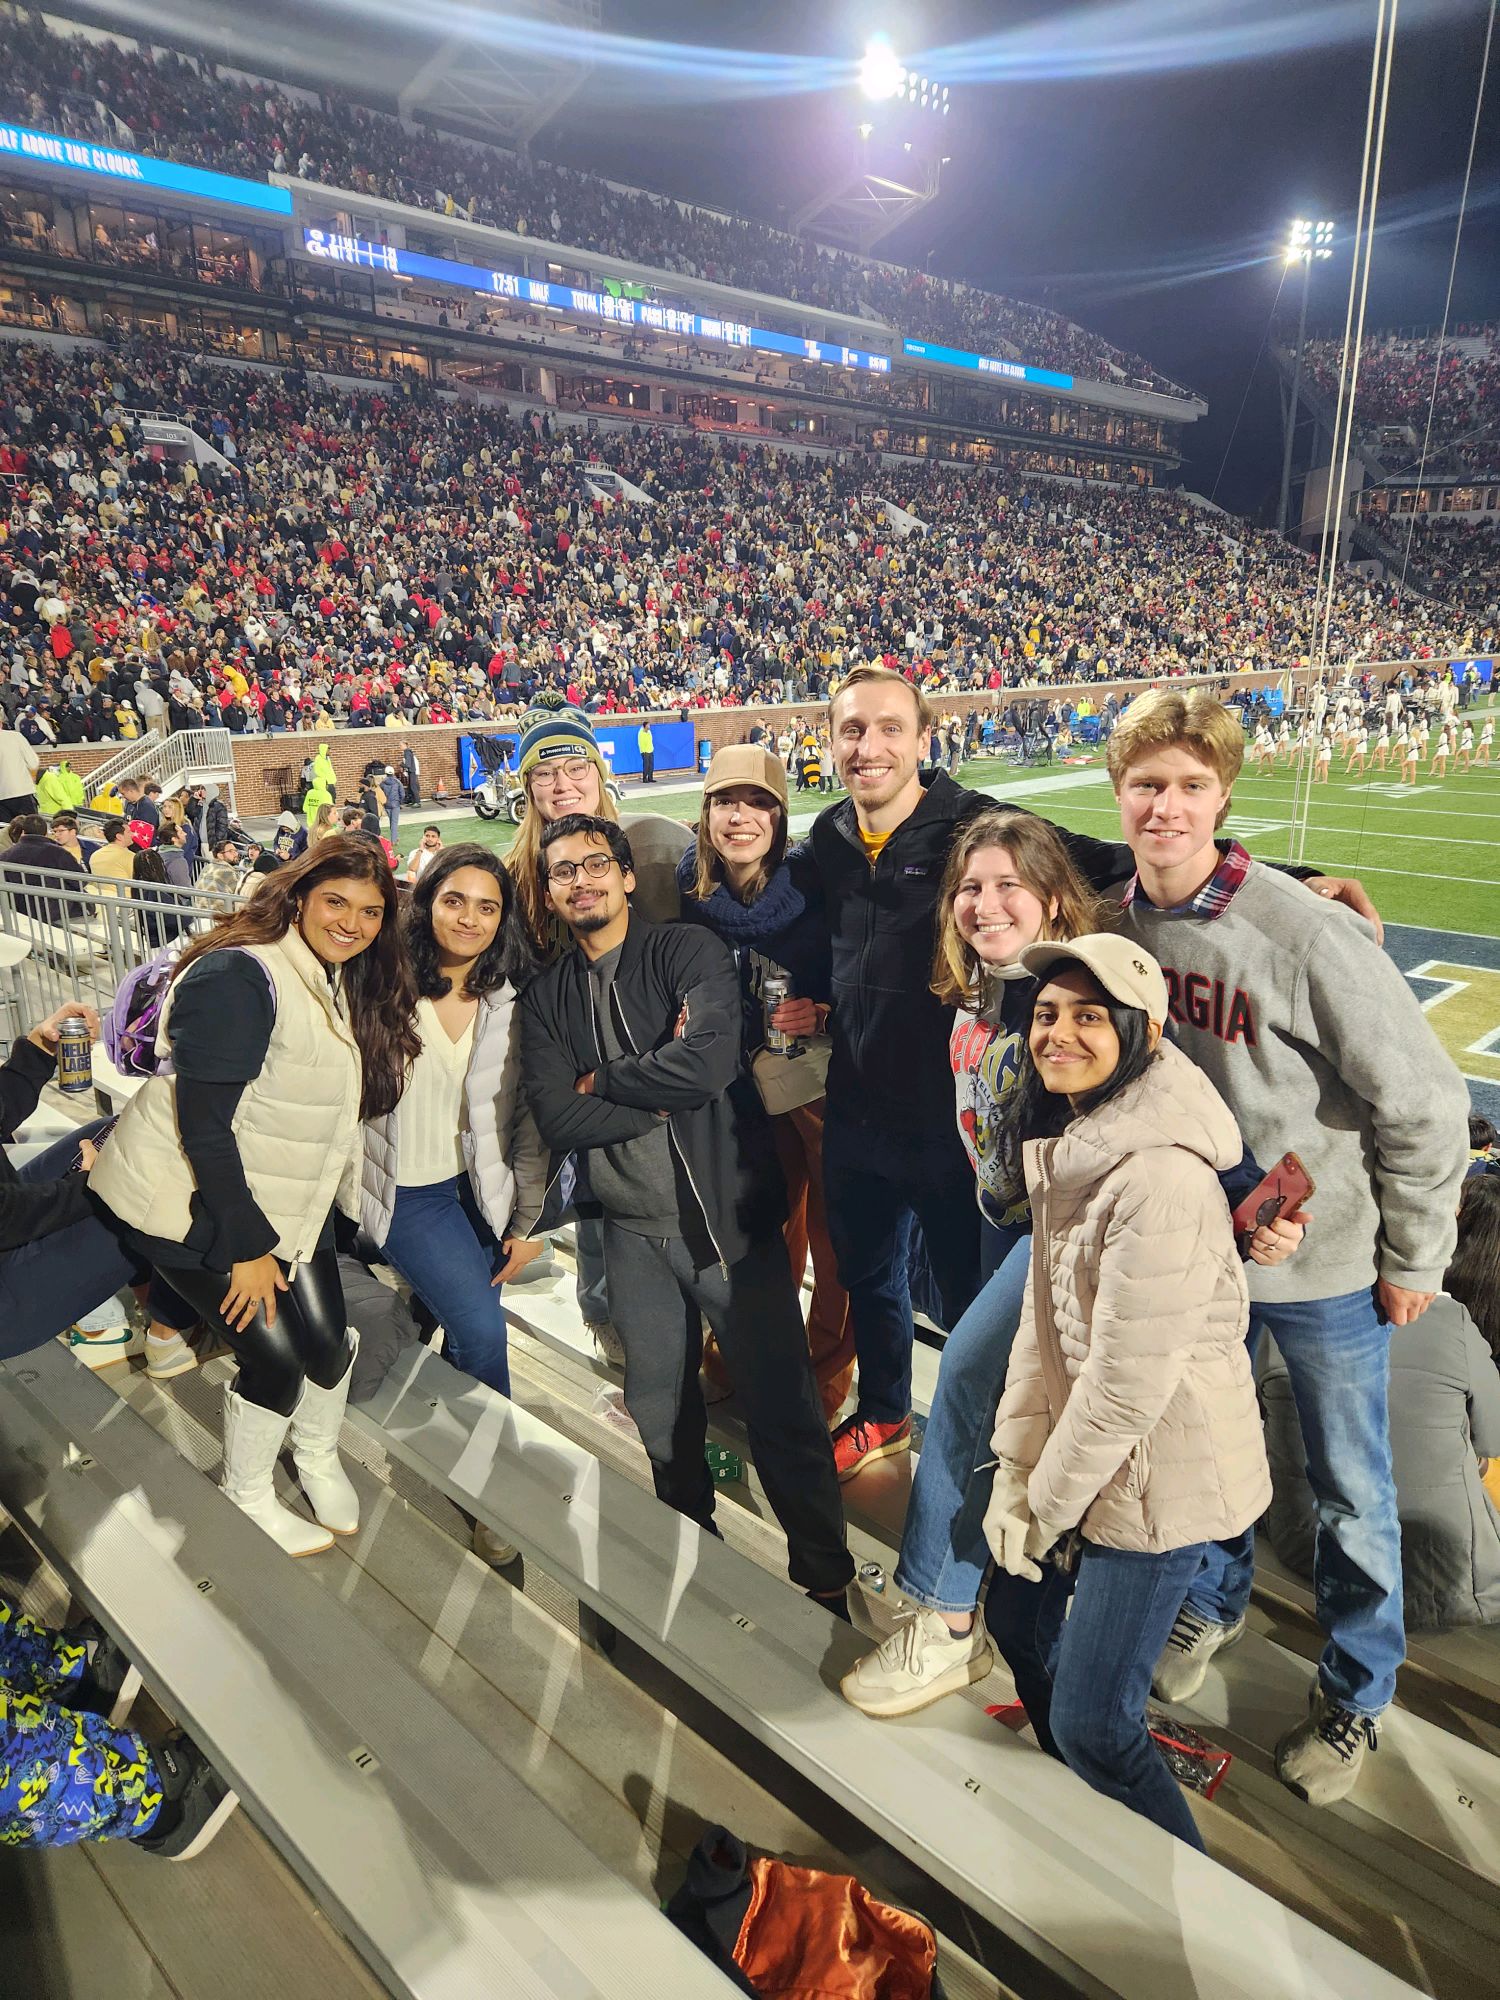 MSEEM Students gathered together at a Georgia Tech Football Game Smiling in front of the field